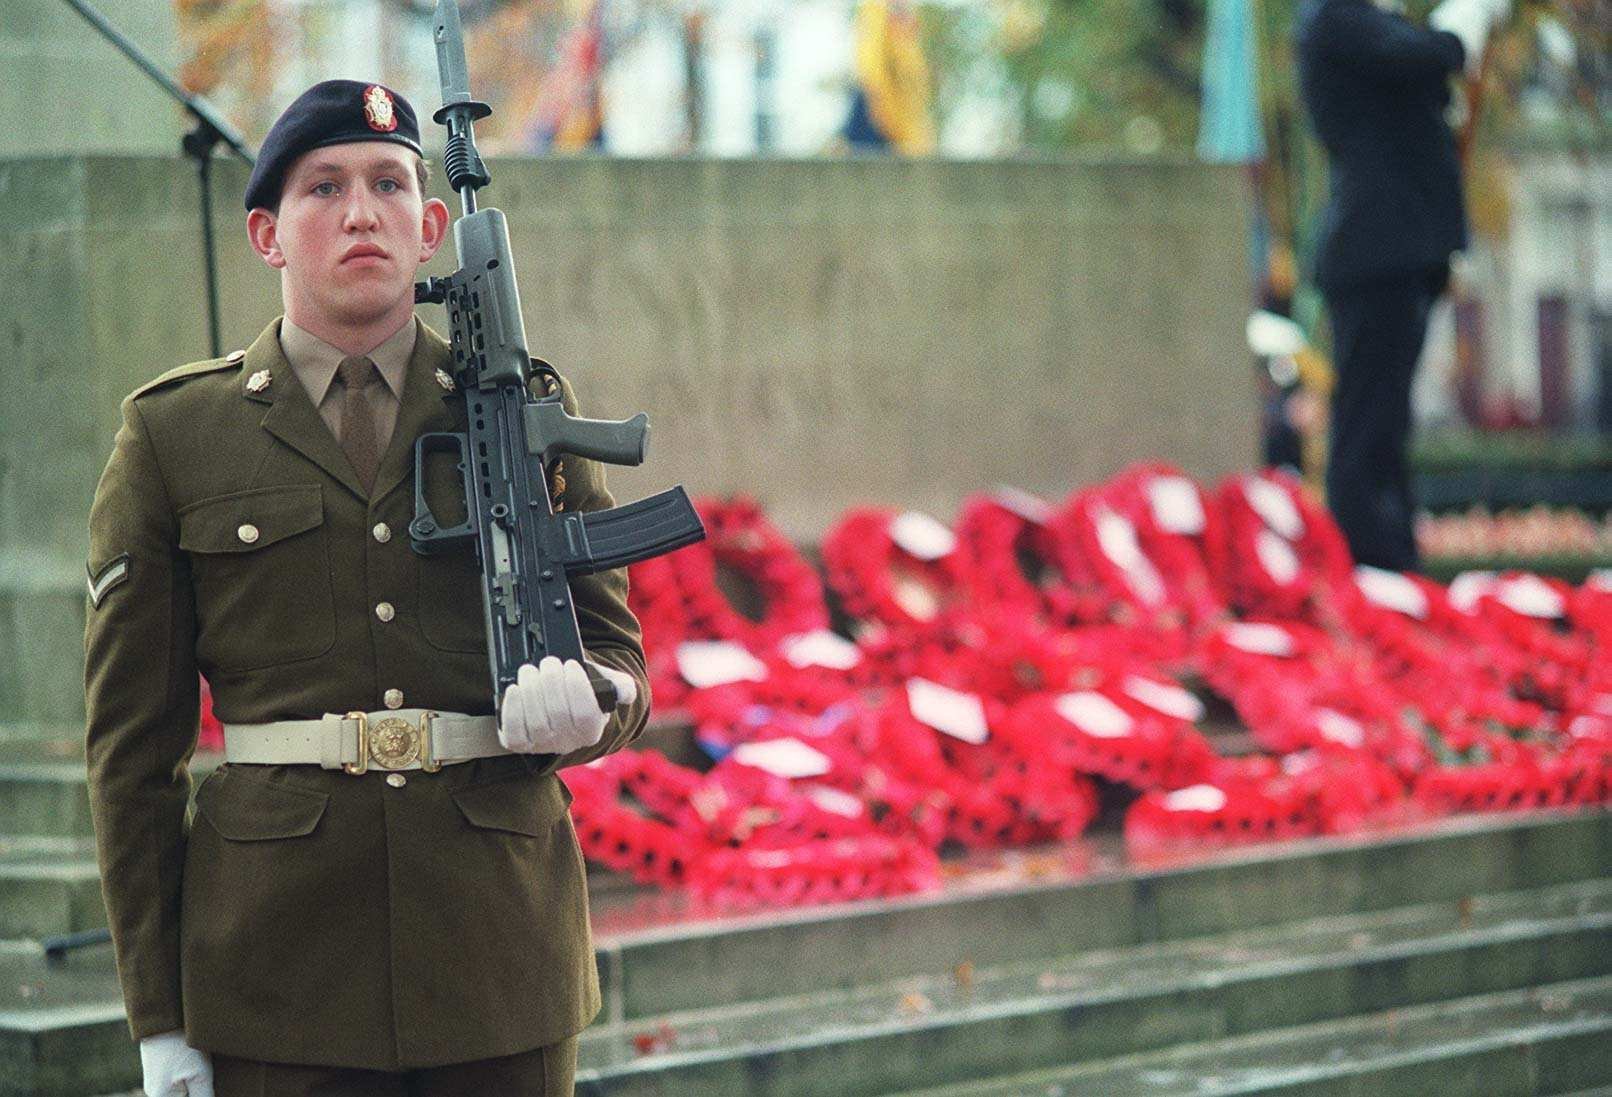 A Sentinel (?) stands guard during the Remembrance Day Service in Southampton.